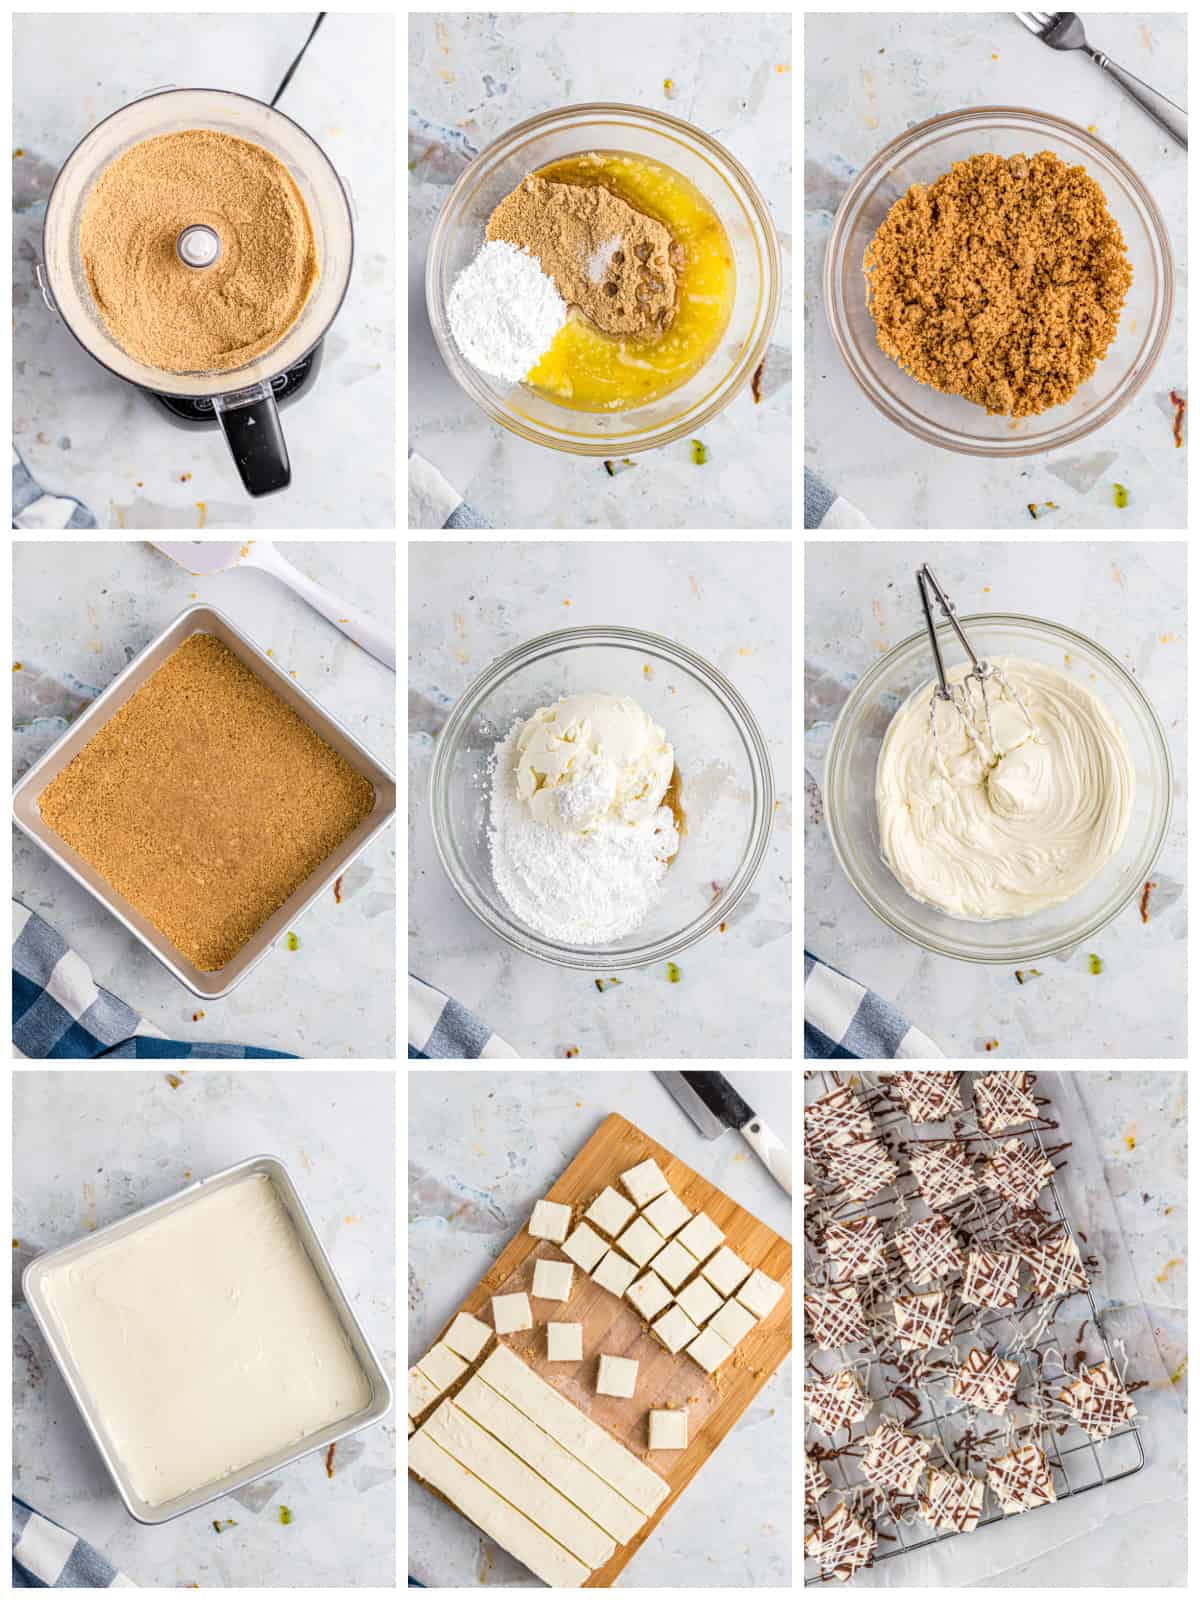 Step by step photos on how to make No Bake Cheesecake Bites.